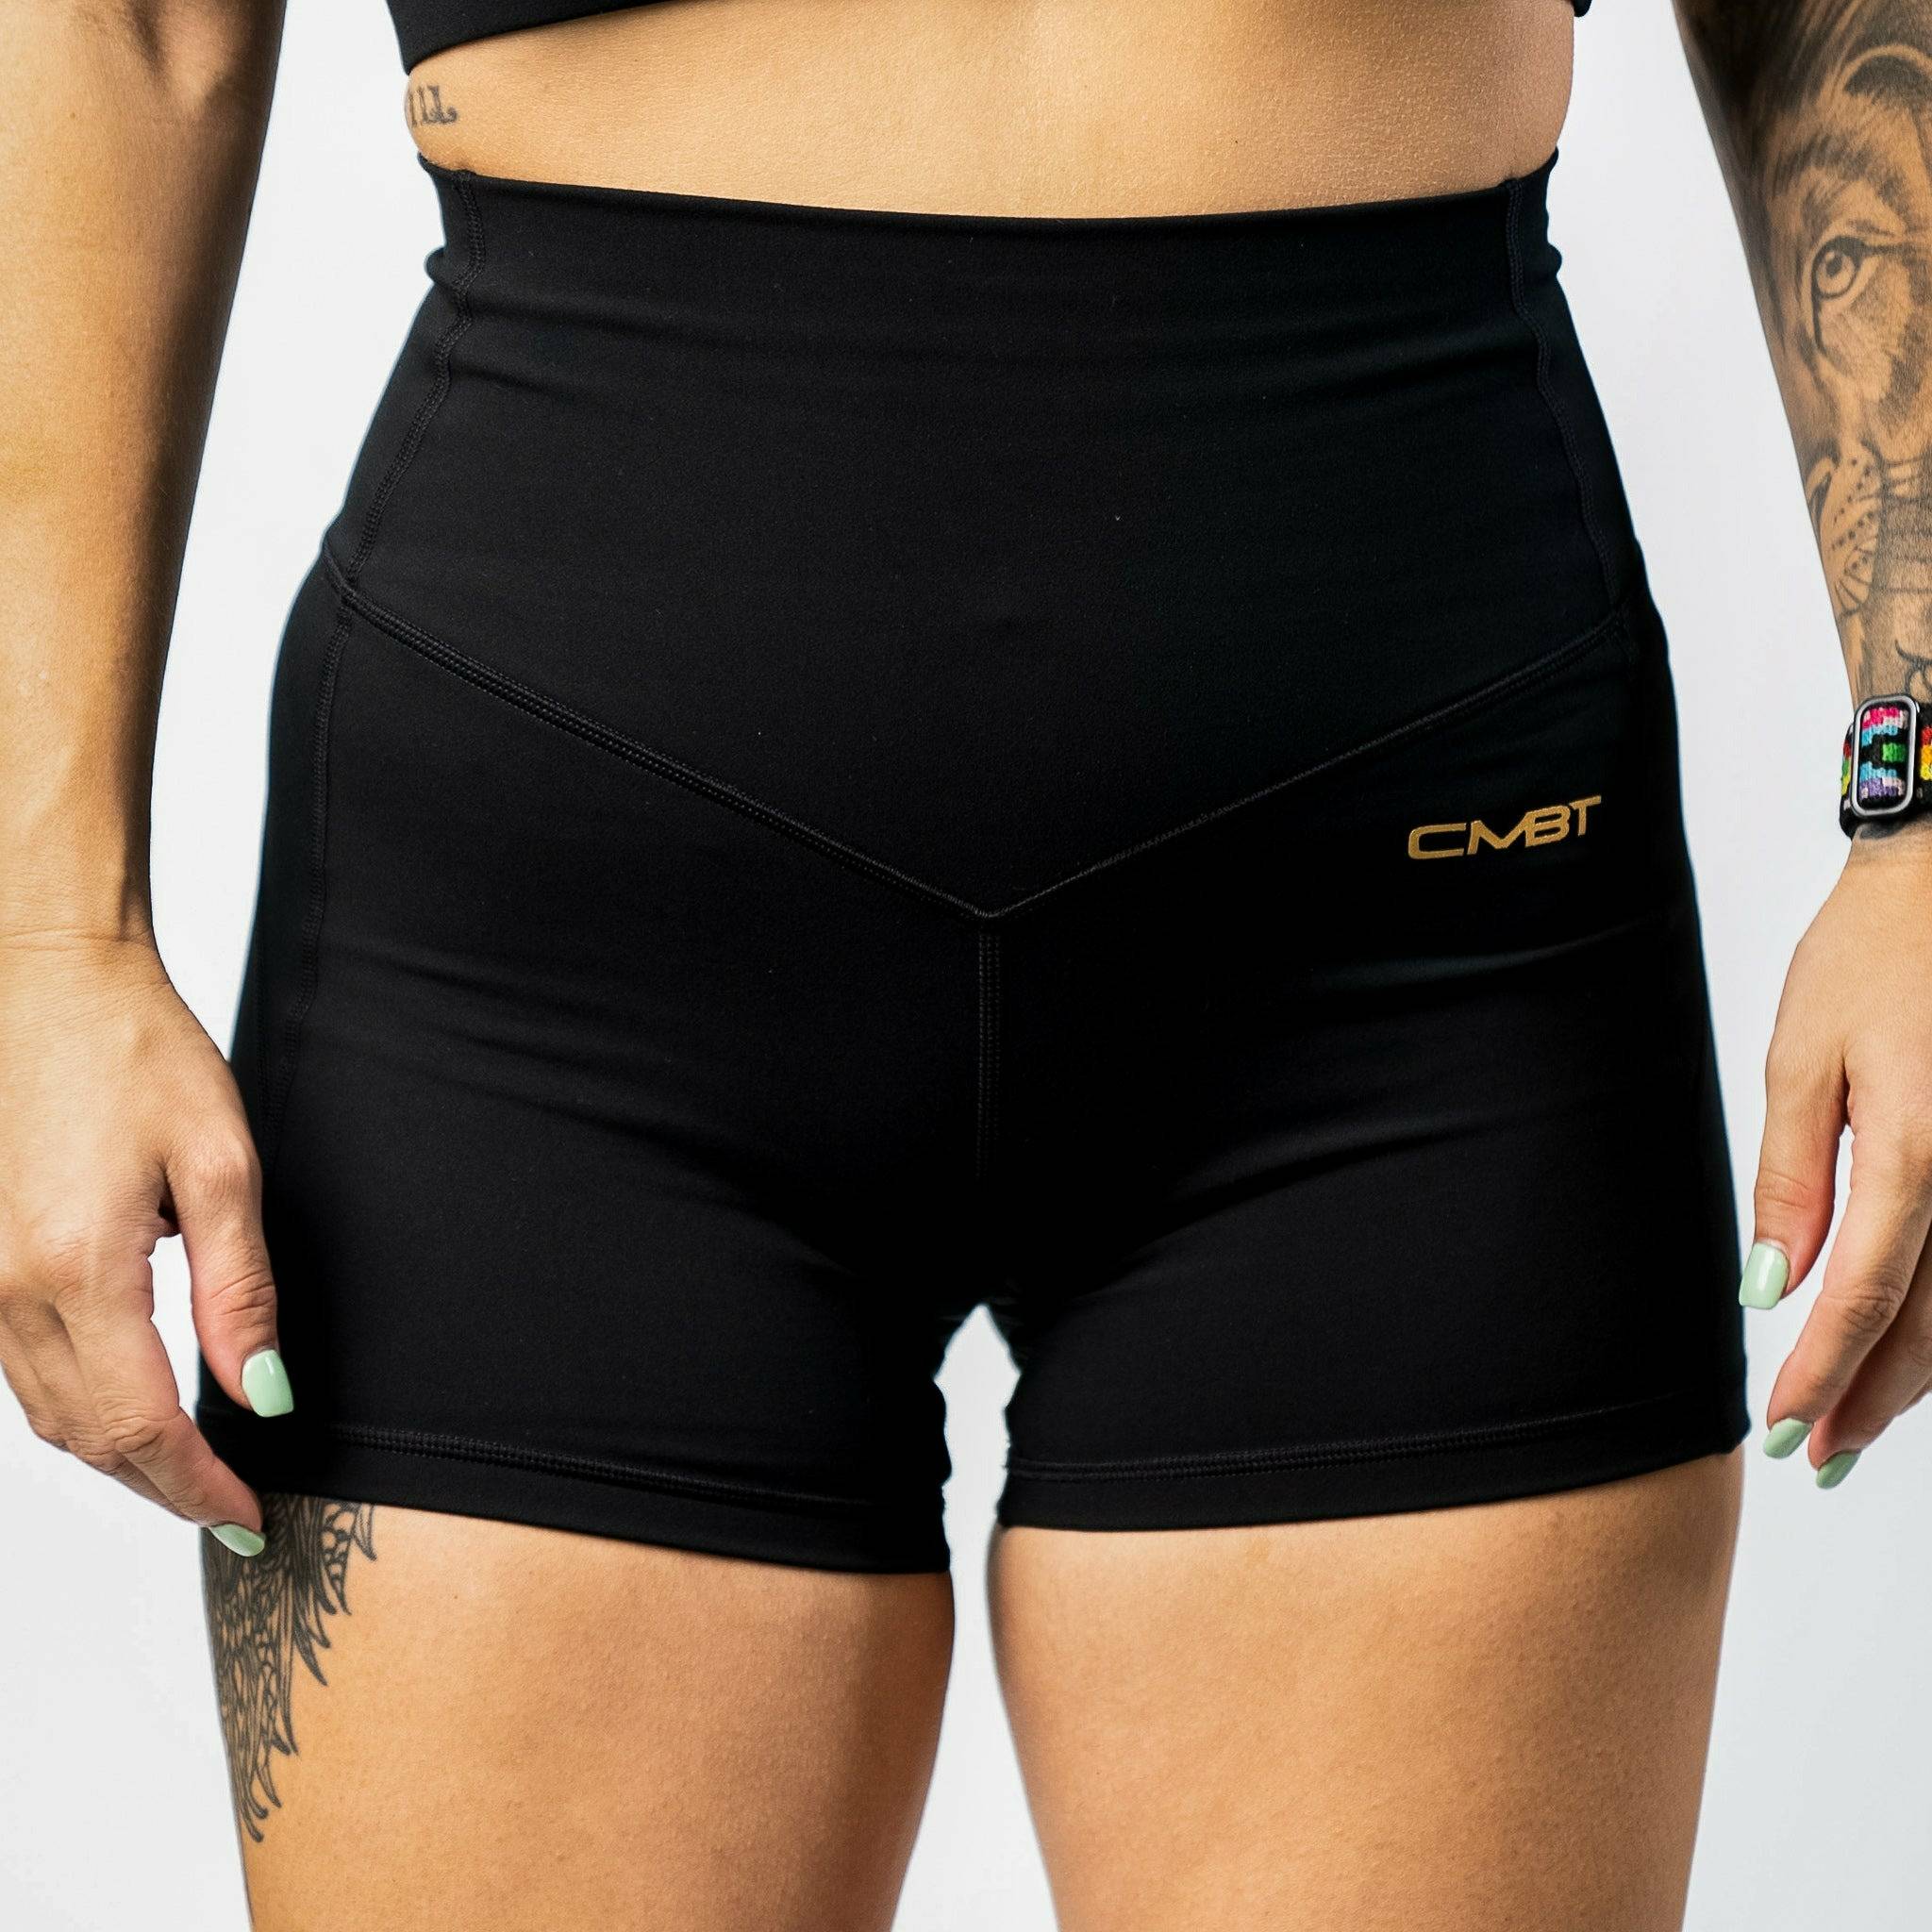 BLACK High-waisted LUX SHORTS